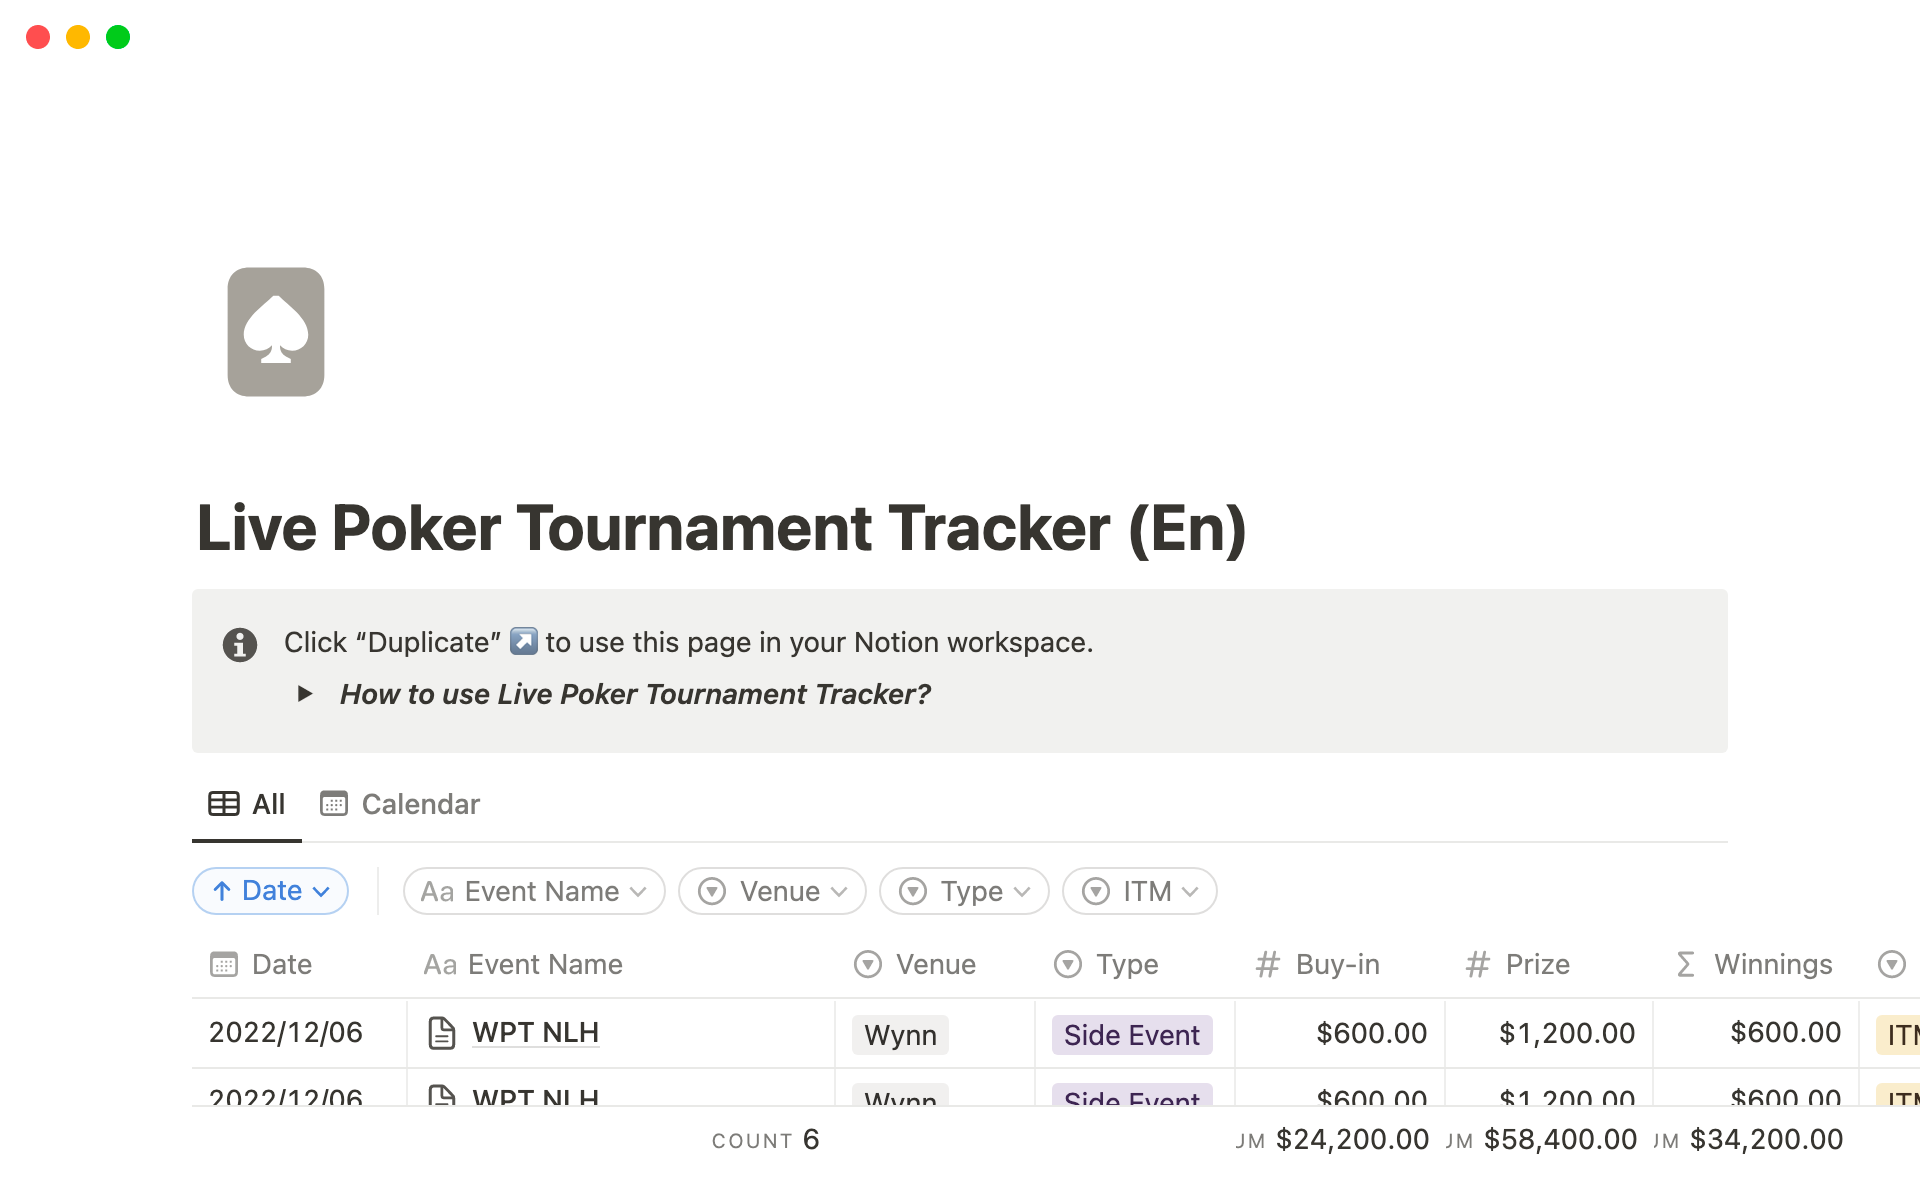 Record your live poker tournament history in a single database.